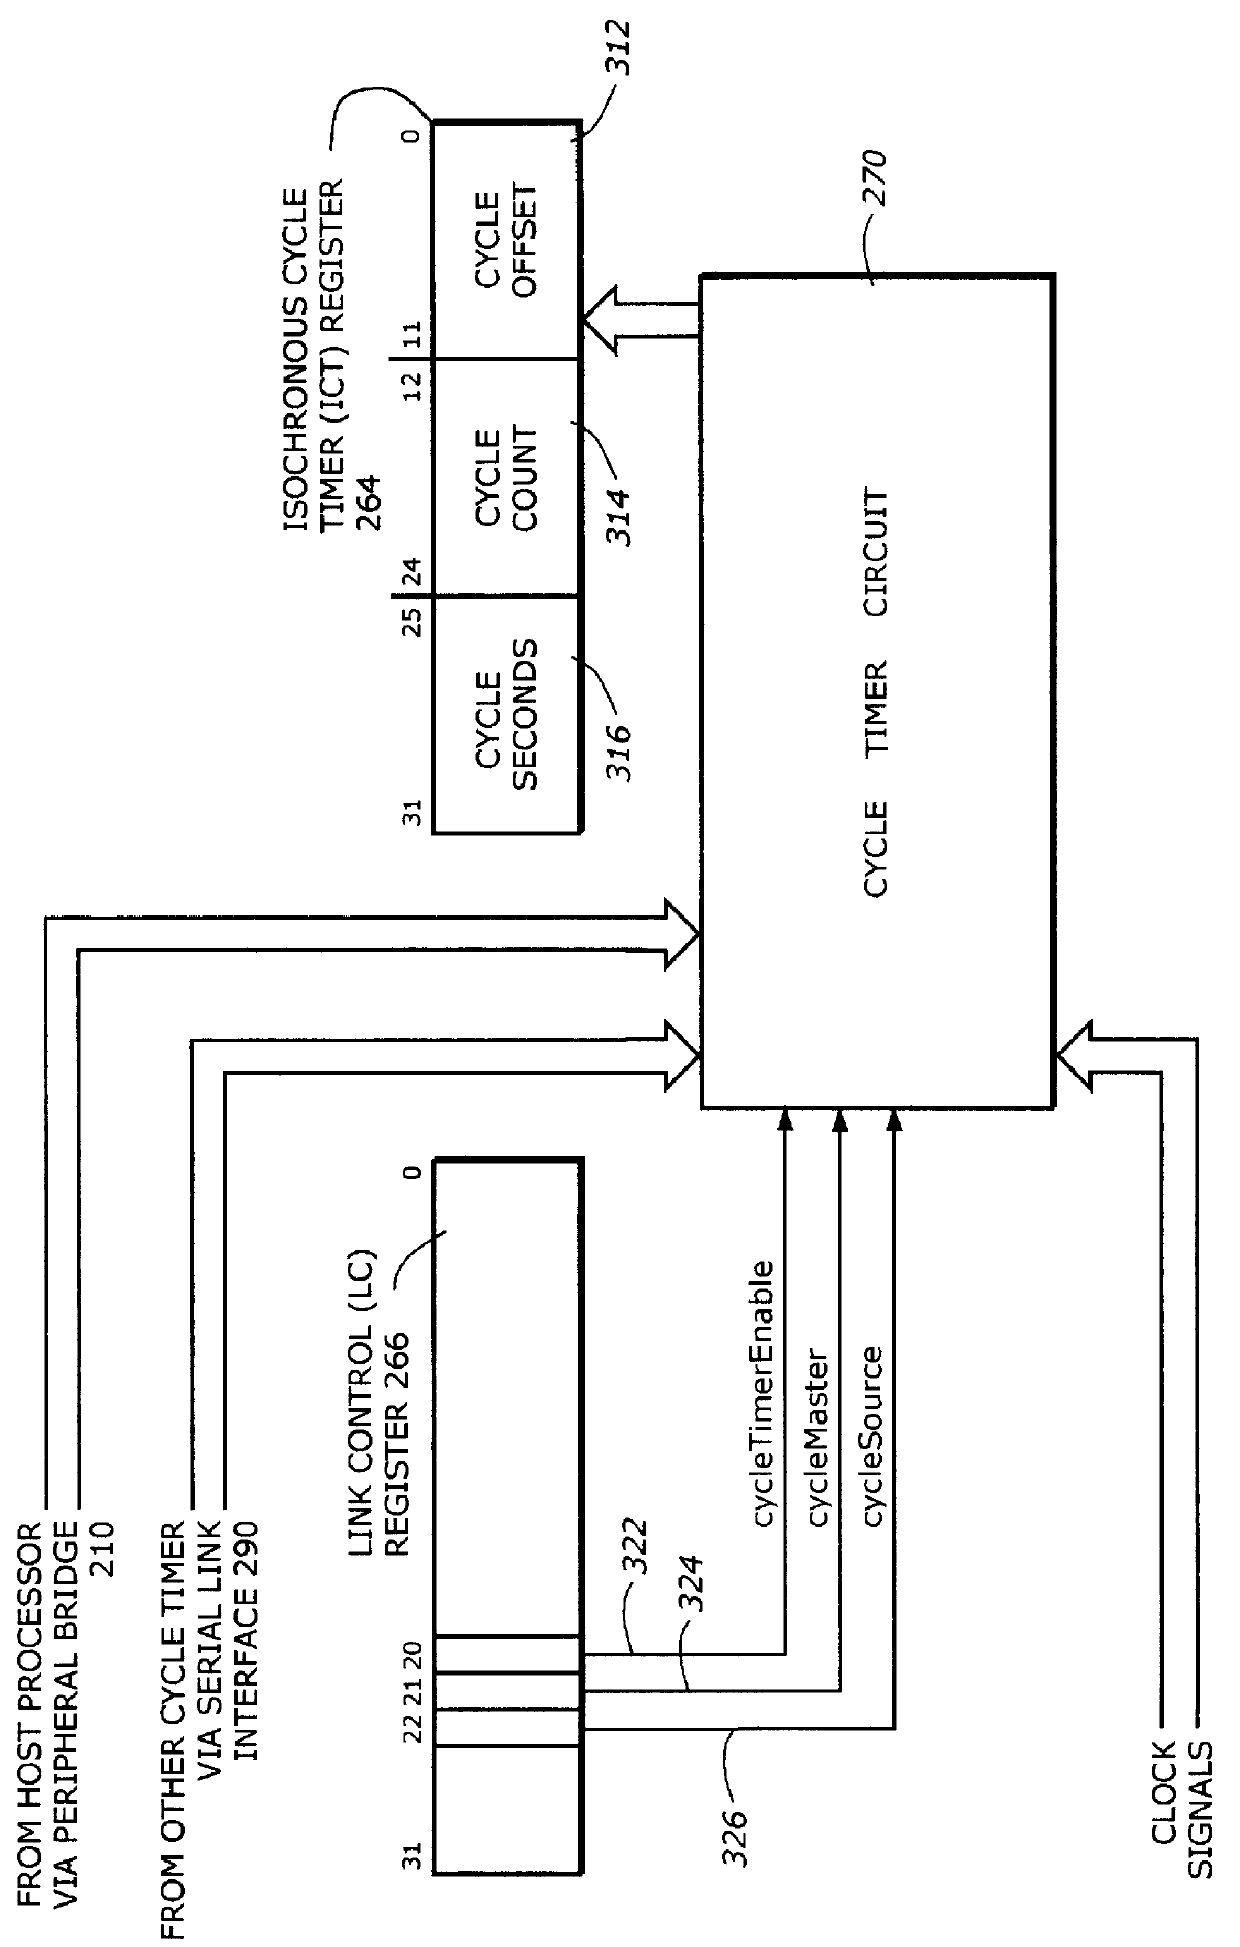 Method and apparatus for updating a timer from multiple timing domains